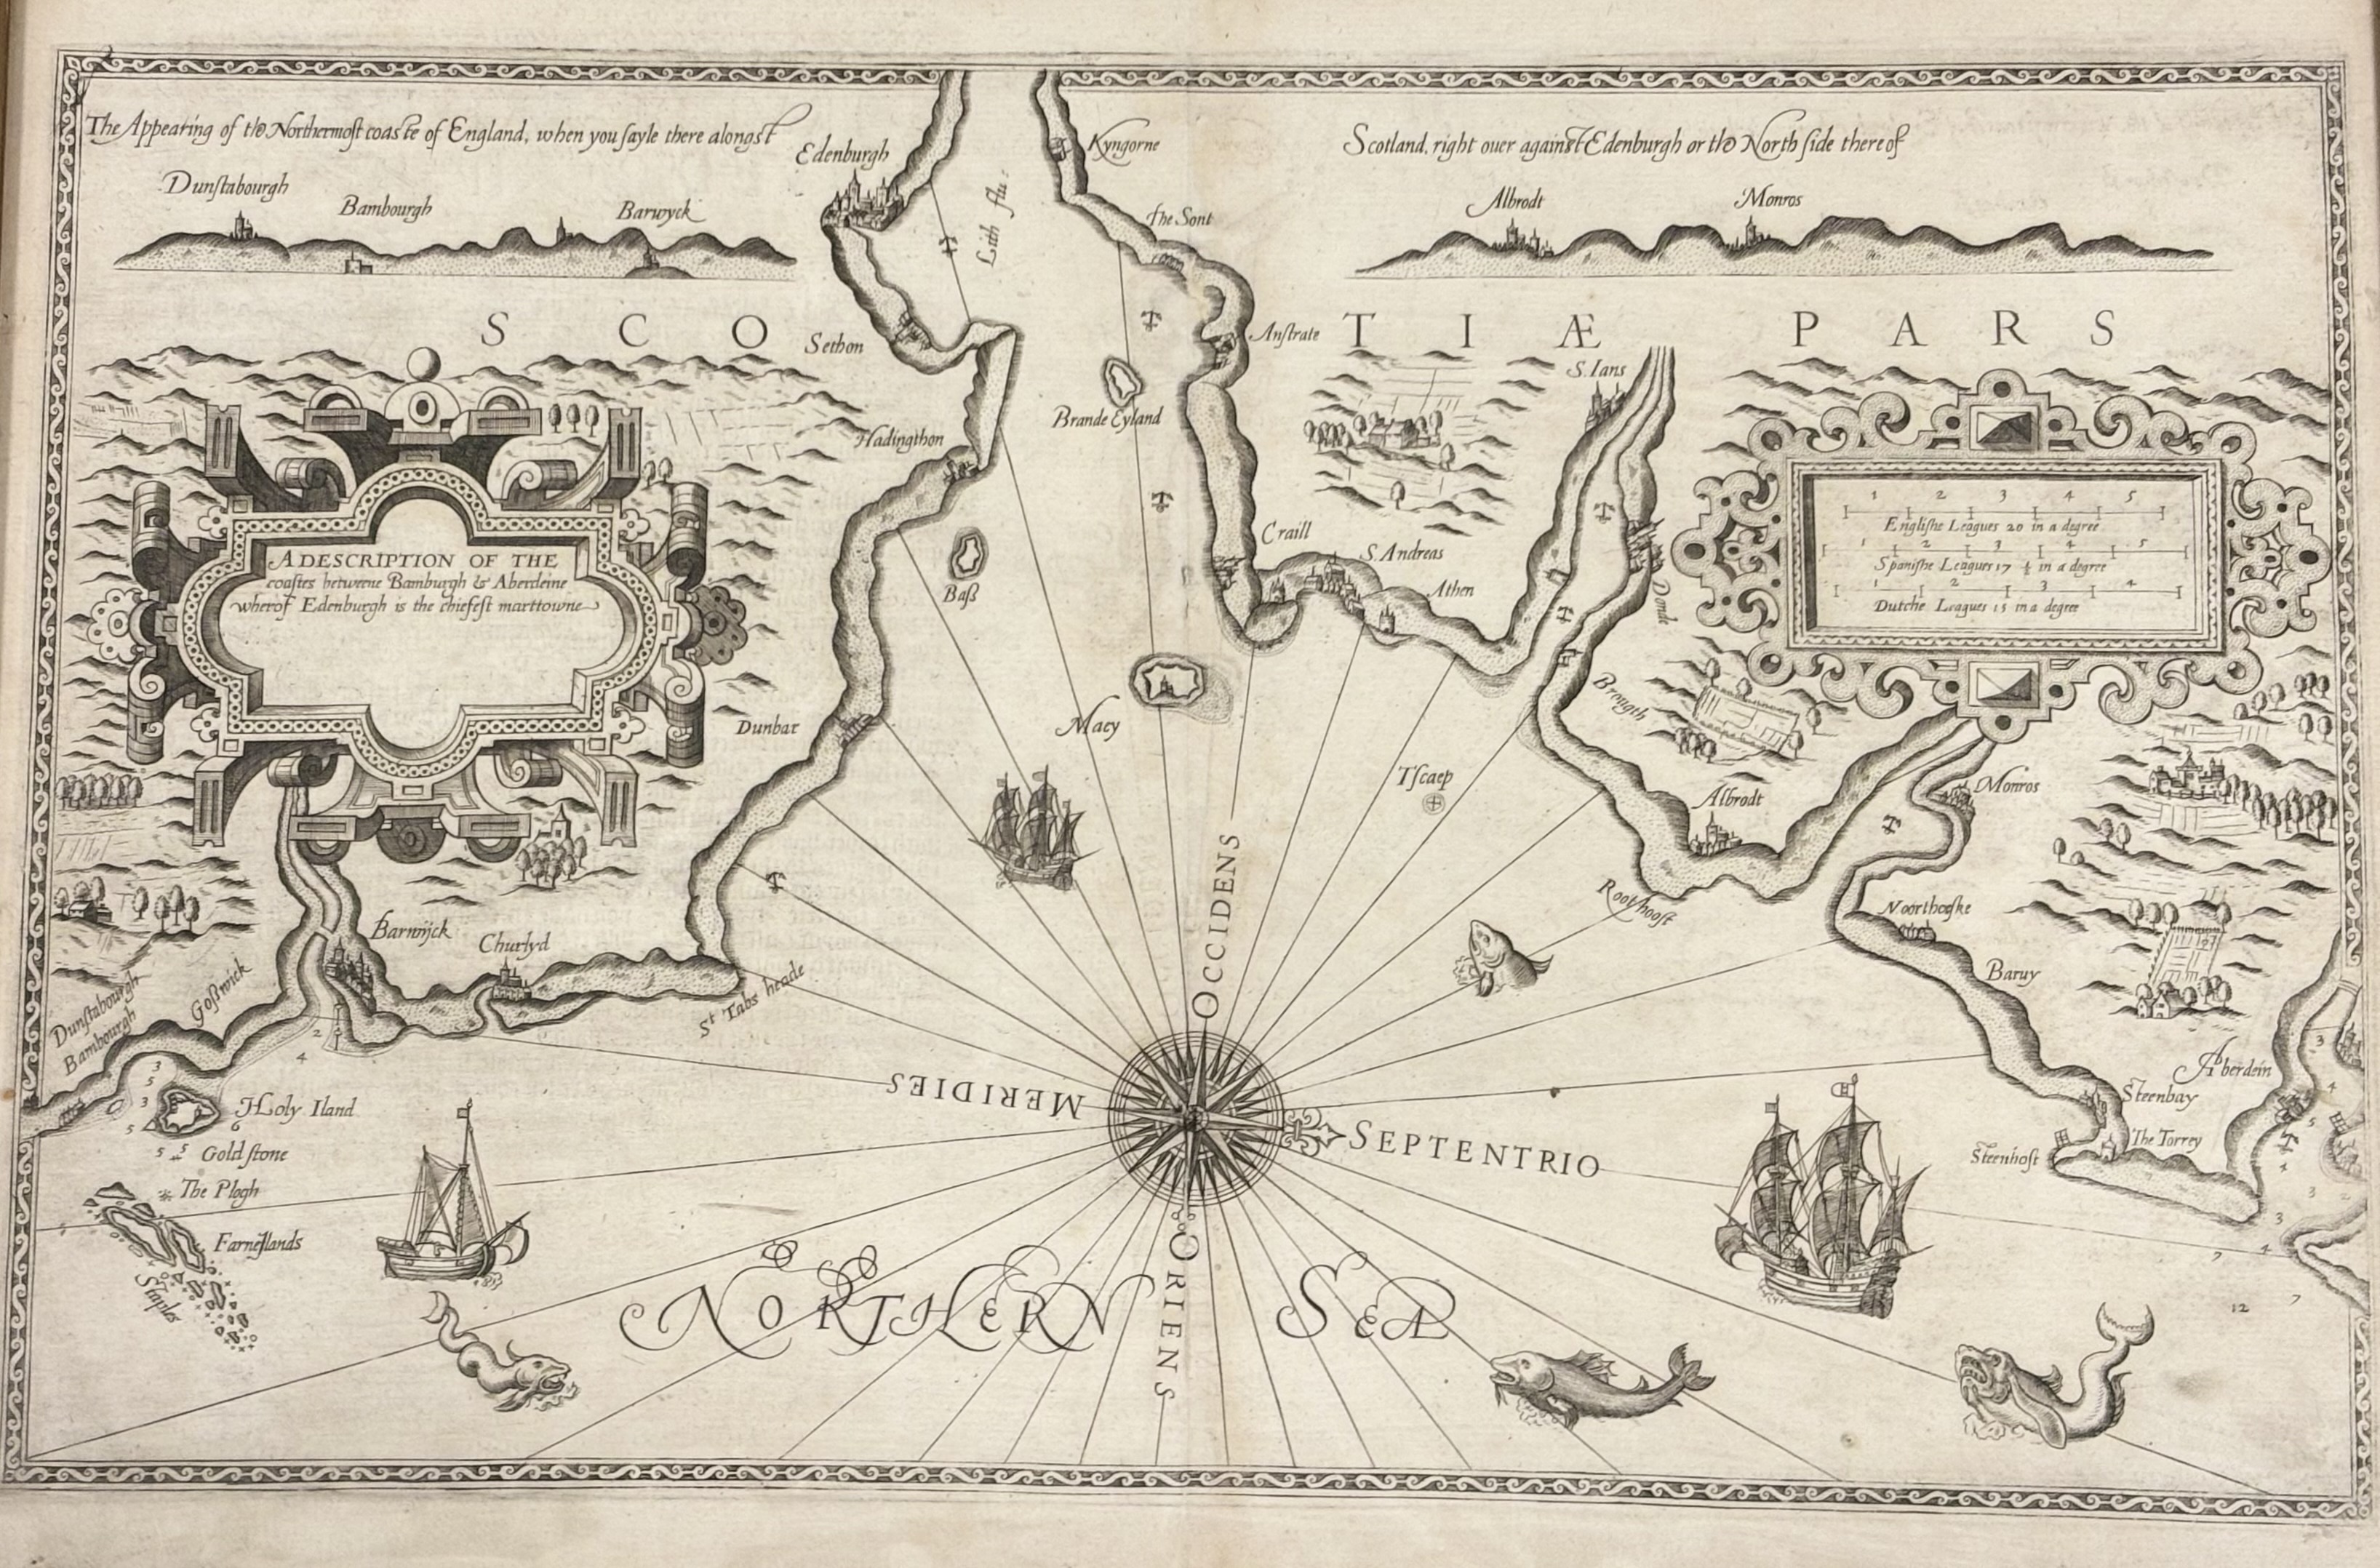 Wagenhaer (Lucas Janszoon), "A True Description of the Sea Coastes betweene Bambourgh and Aberdyne", - Image 2 of 3